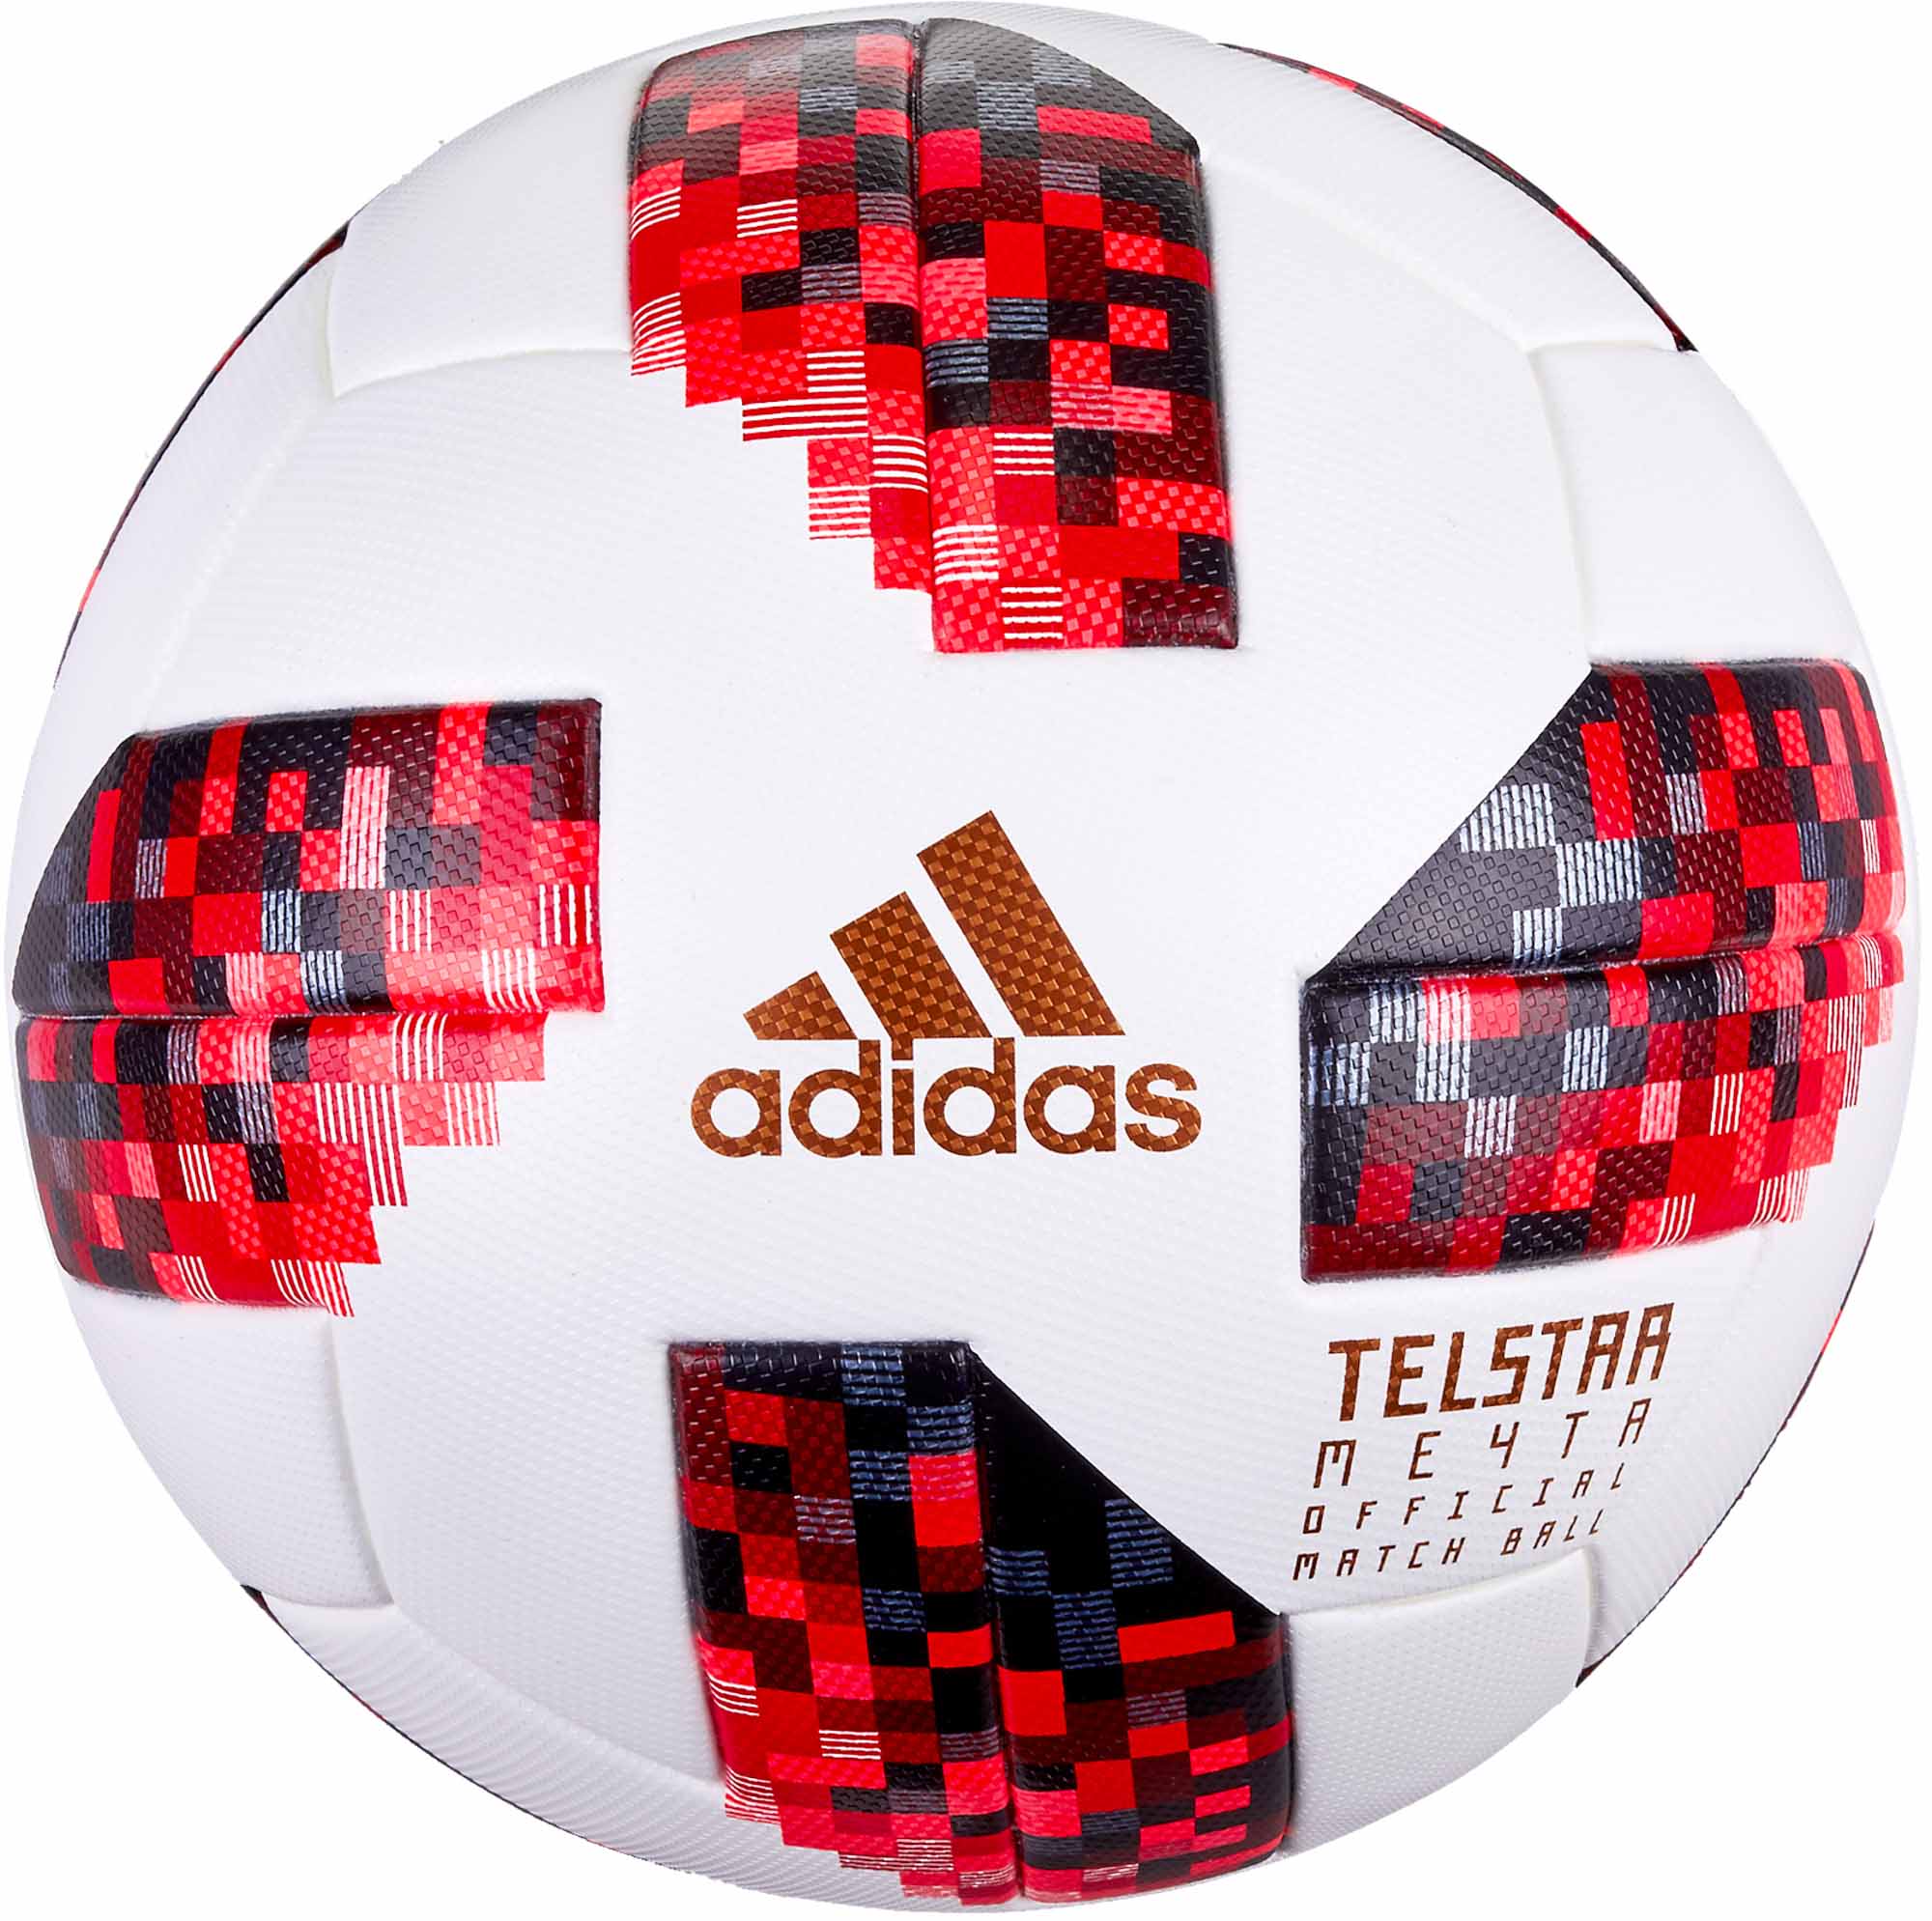 adidas Telstar 18 Official World Cup Match Ball - Rounds White/Solar Red - Soccer Master